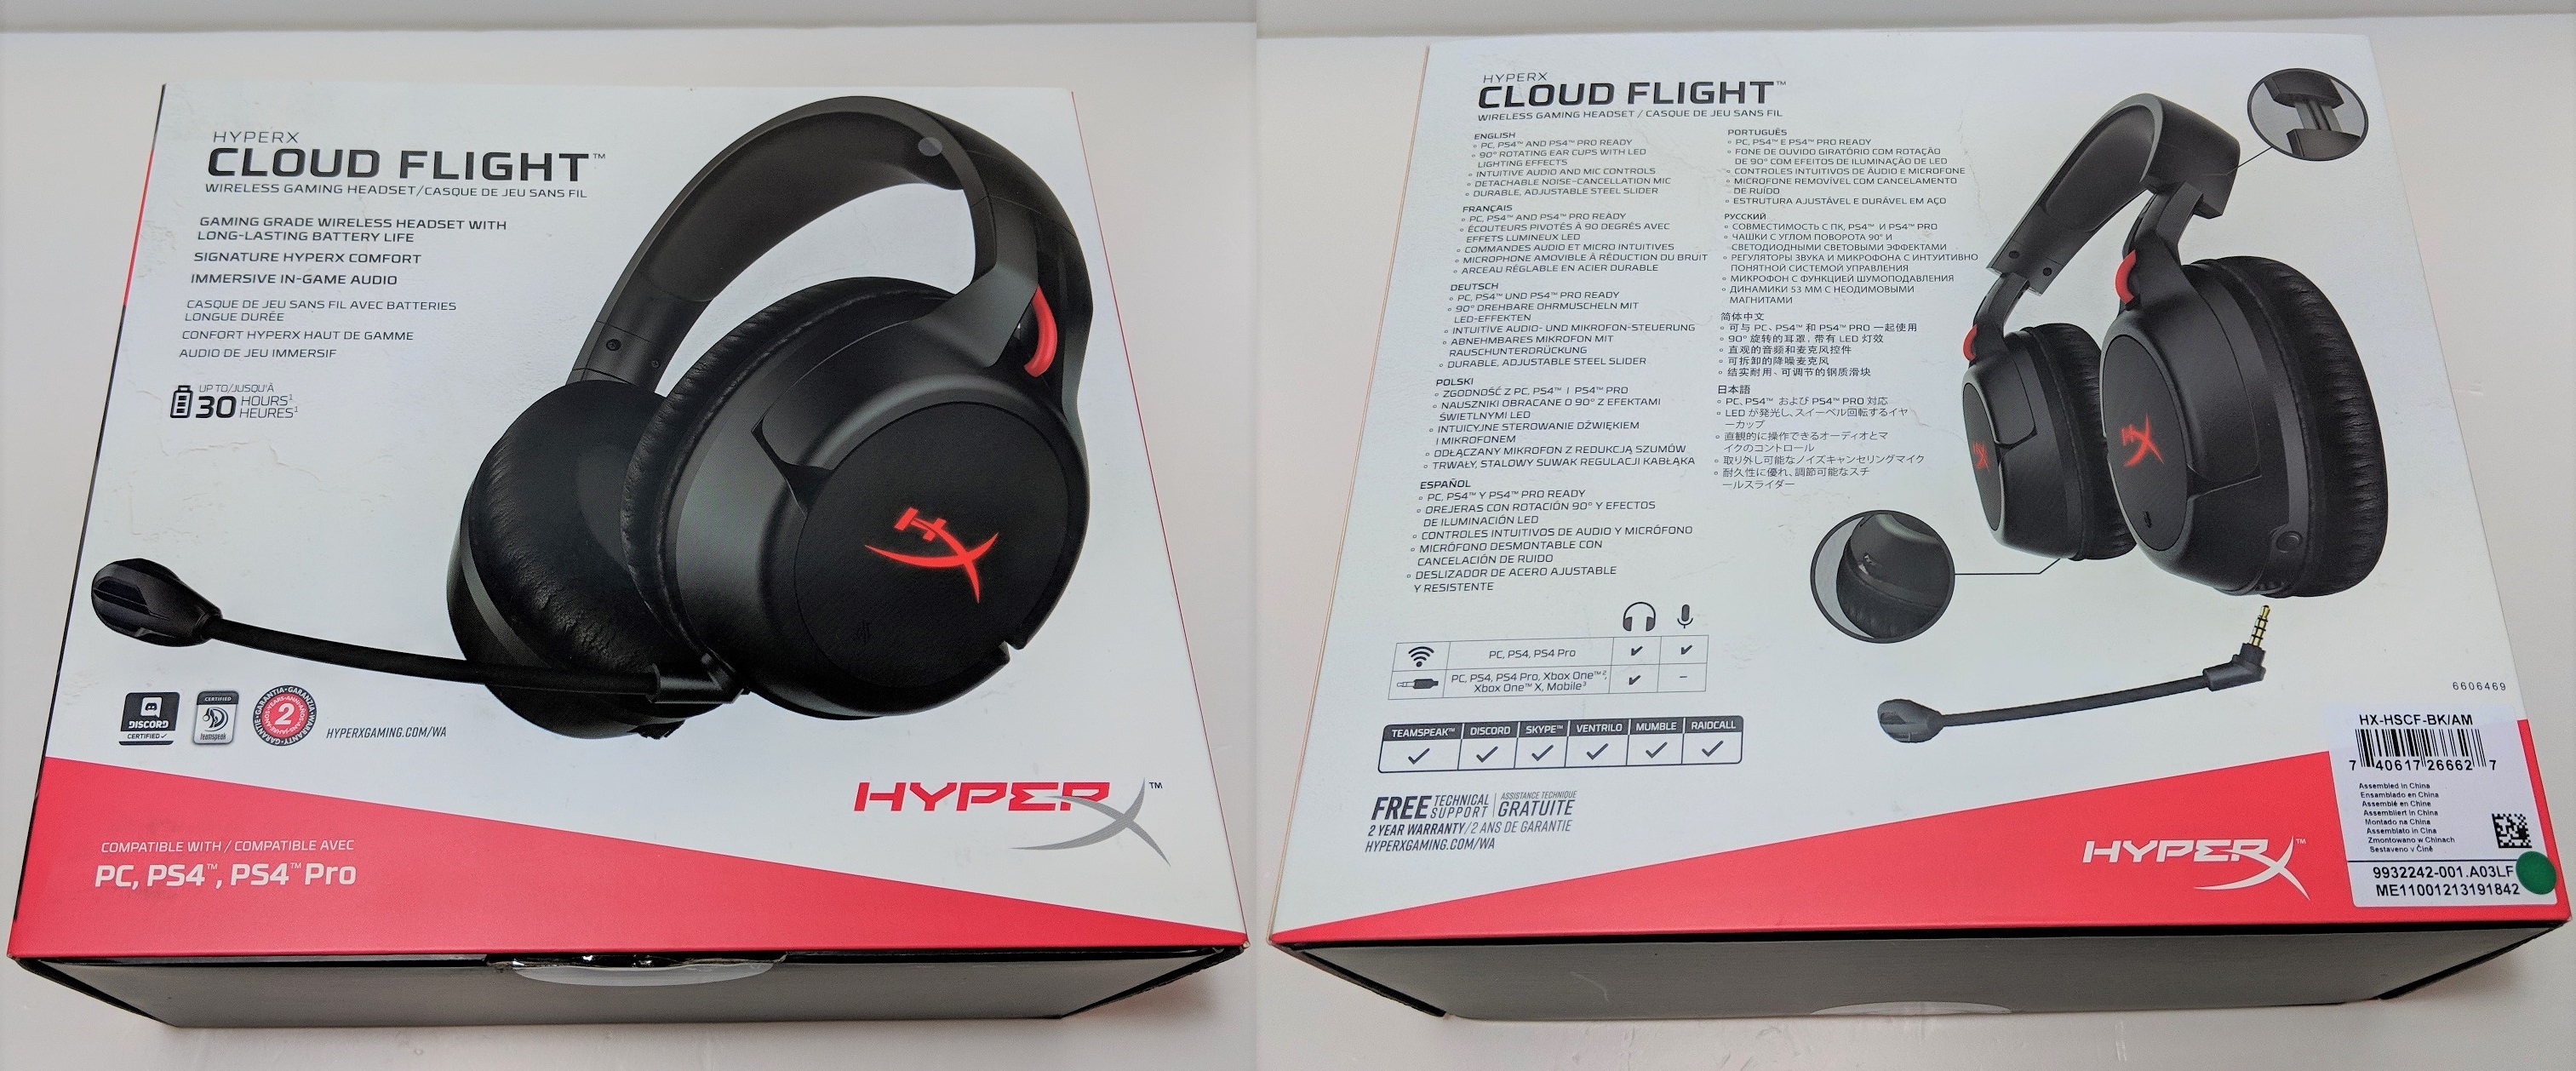 Unboxing And Review Of Hyperx Cloud Flight Wireless Gaming Headset